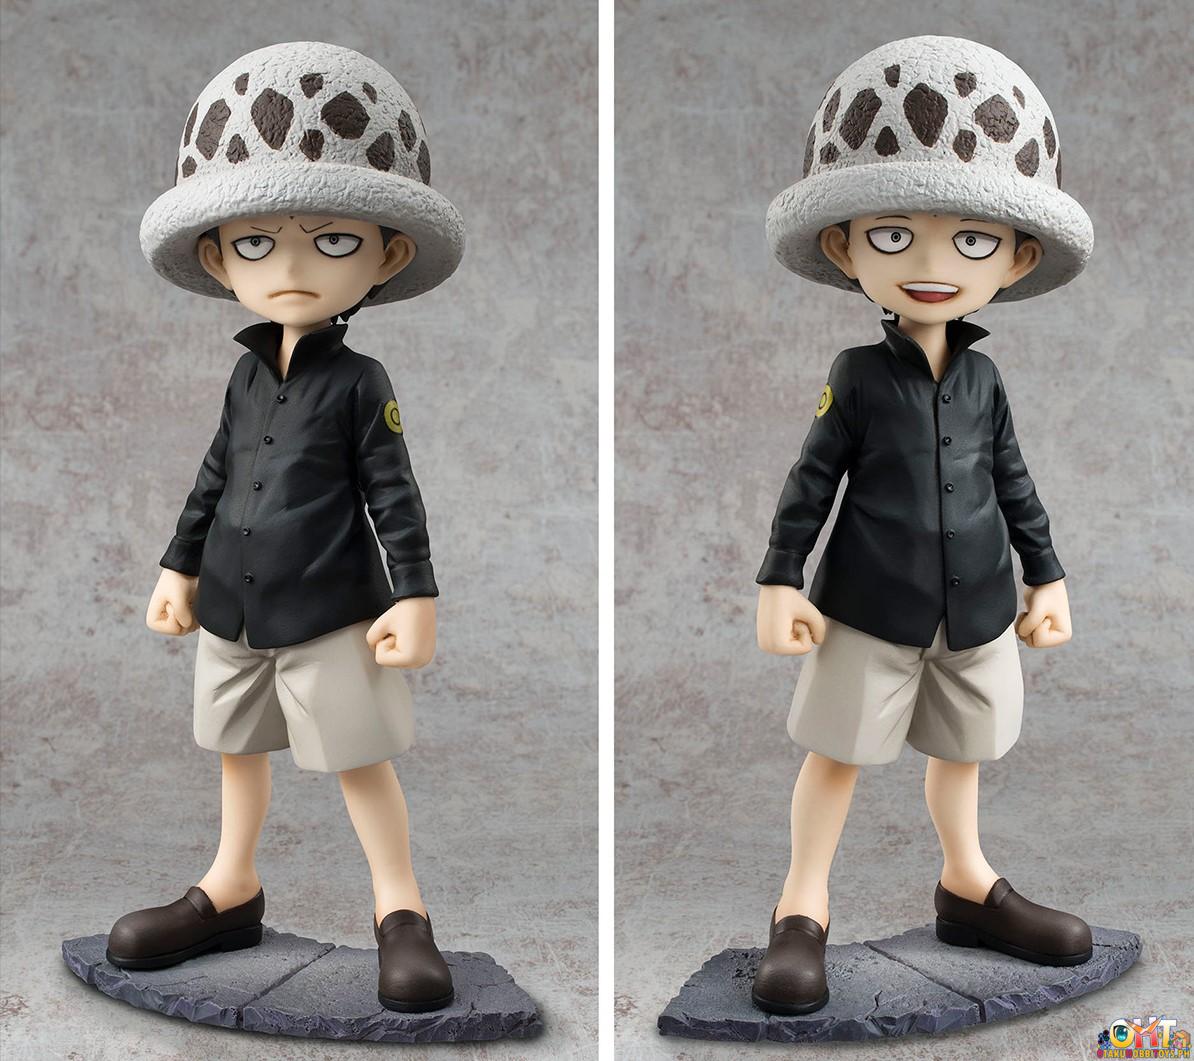 [REISSUE] Portrait.Of.Pirates One Piece "LIMITED EDITION” Corazon & Law